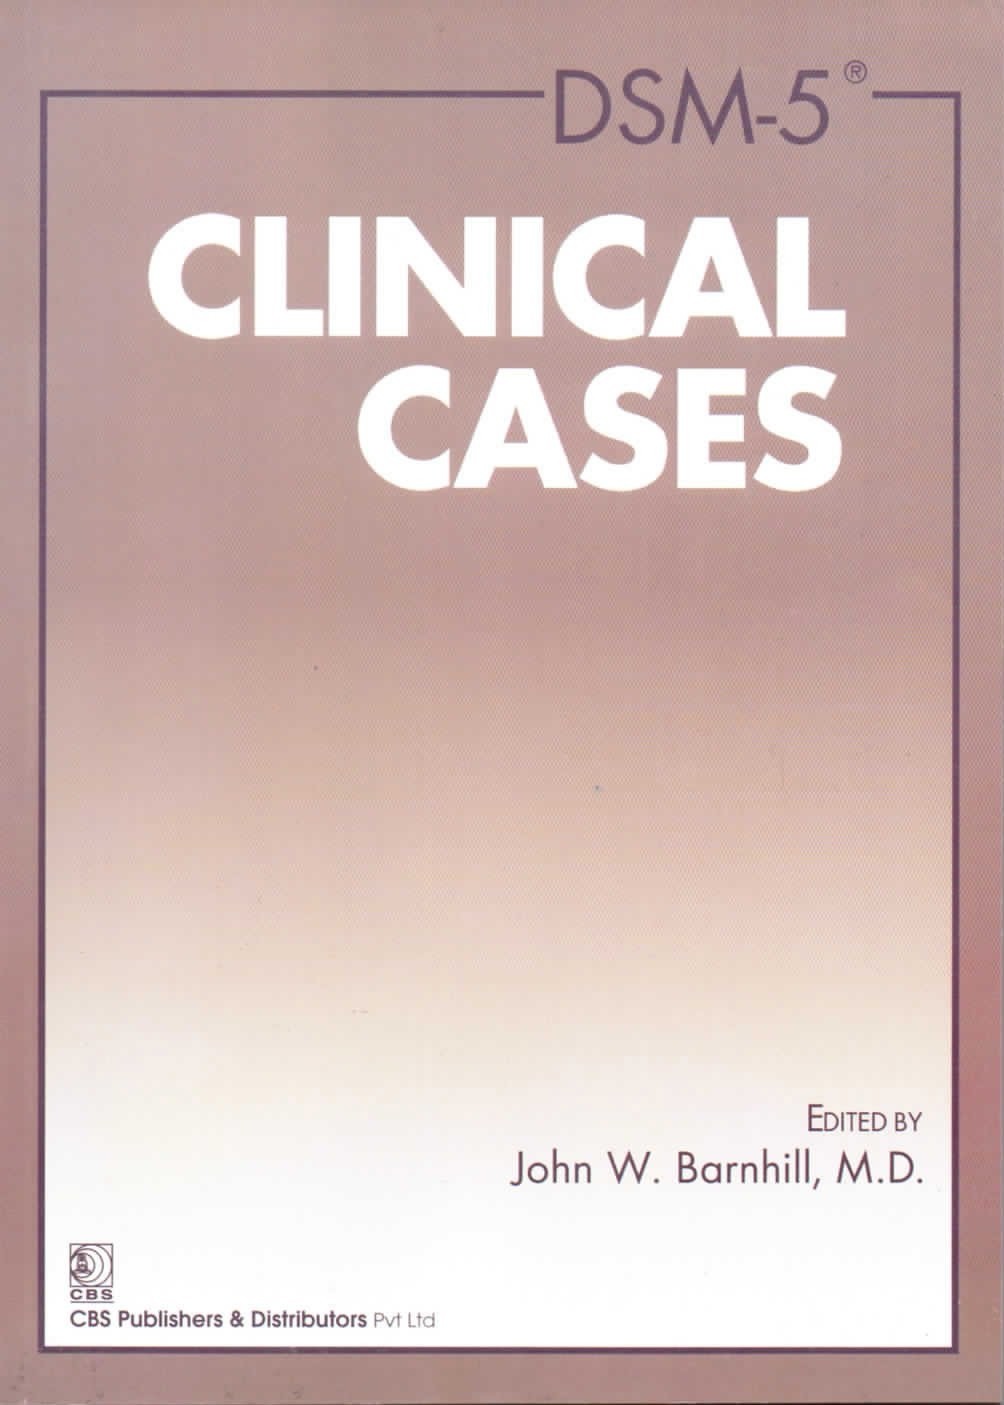 DSM 5 CLINICAL CASES SPL EDITION